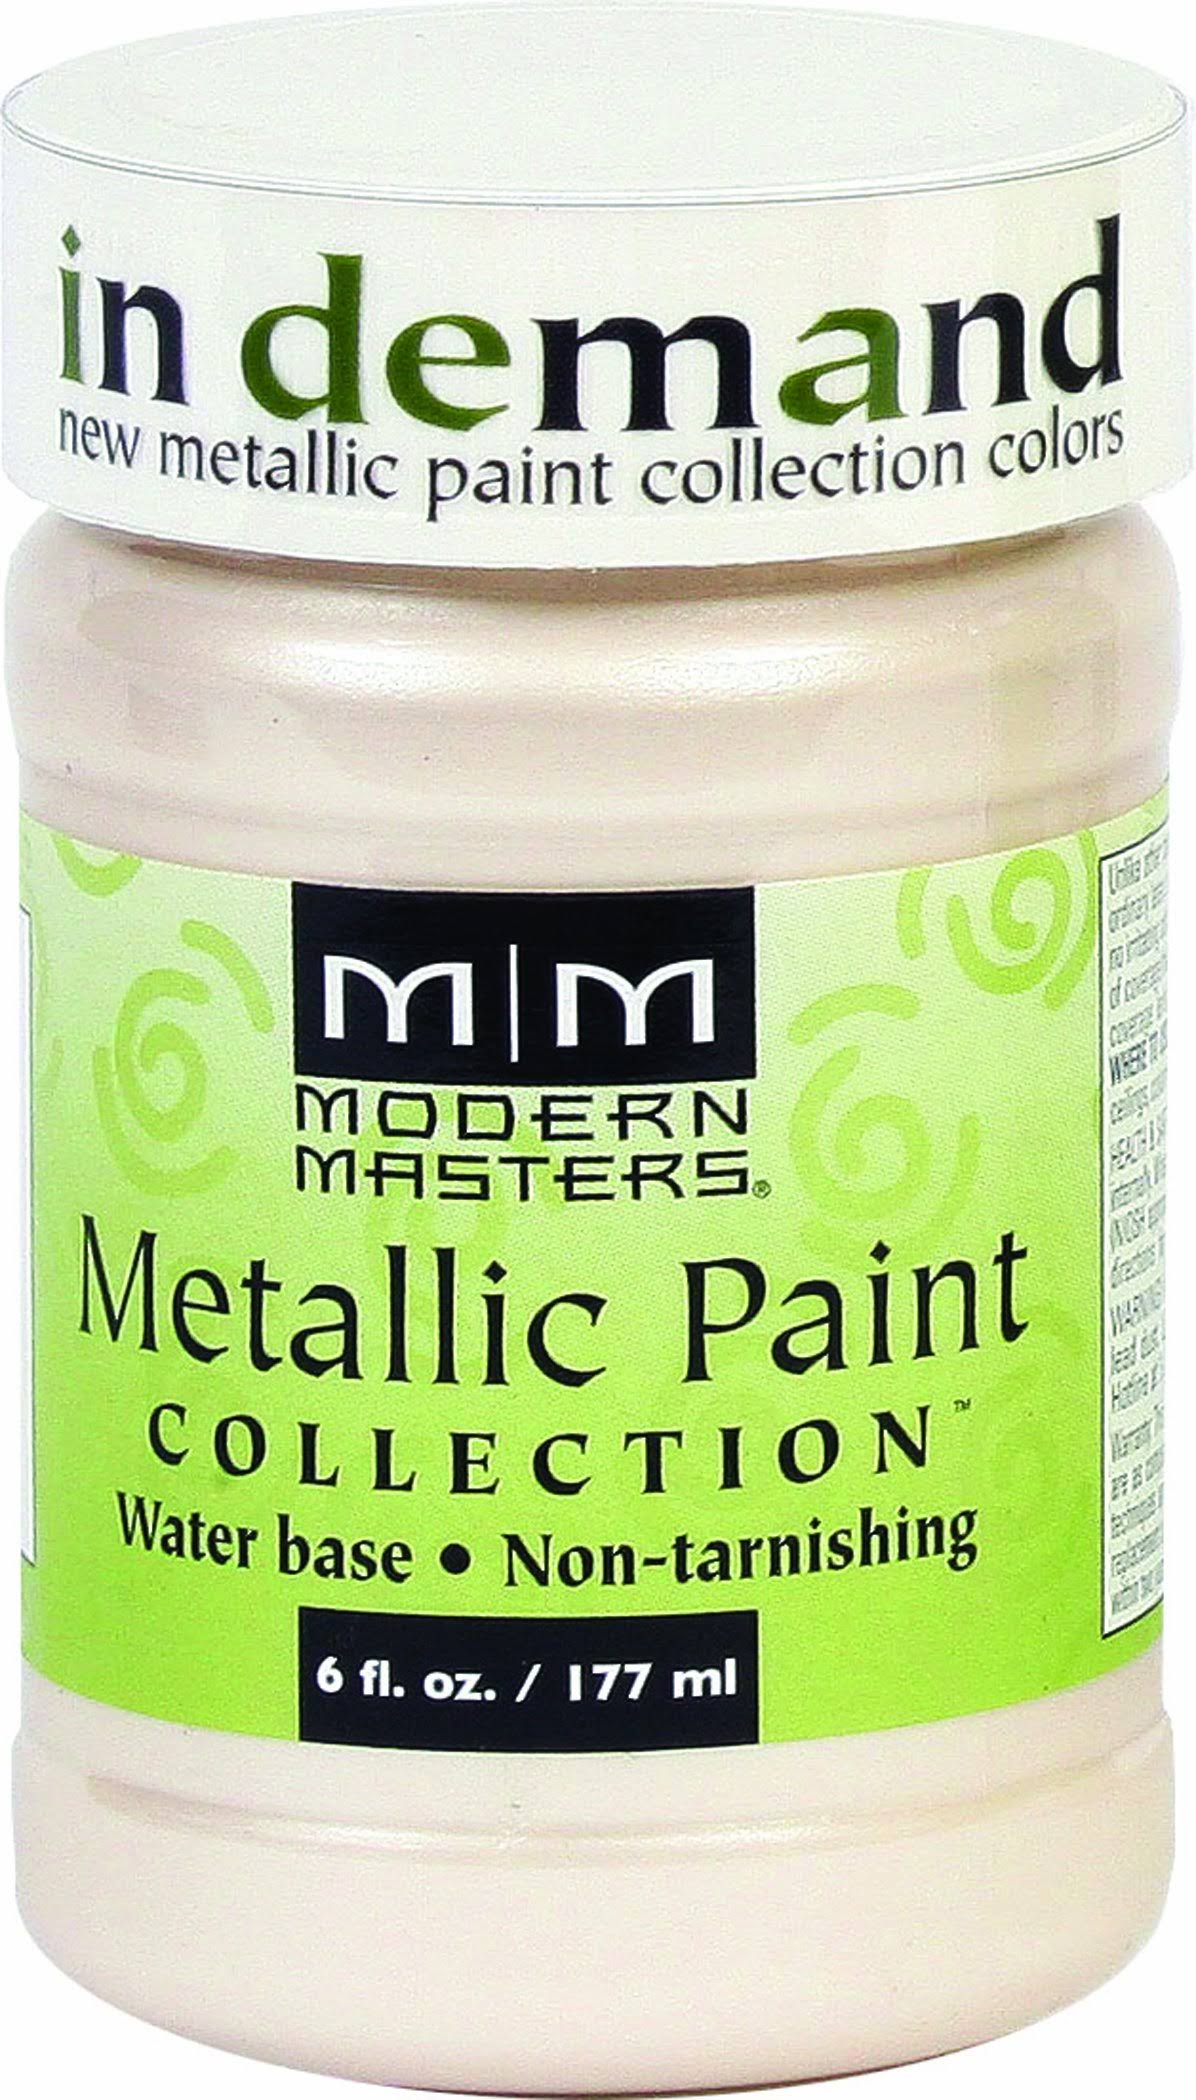 Modern Masters Metallic Paint Collection - Oyster, 177ml